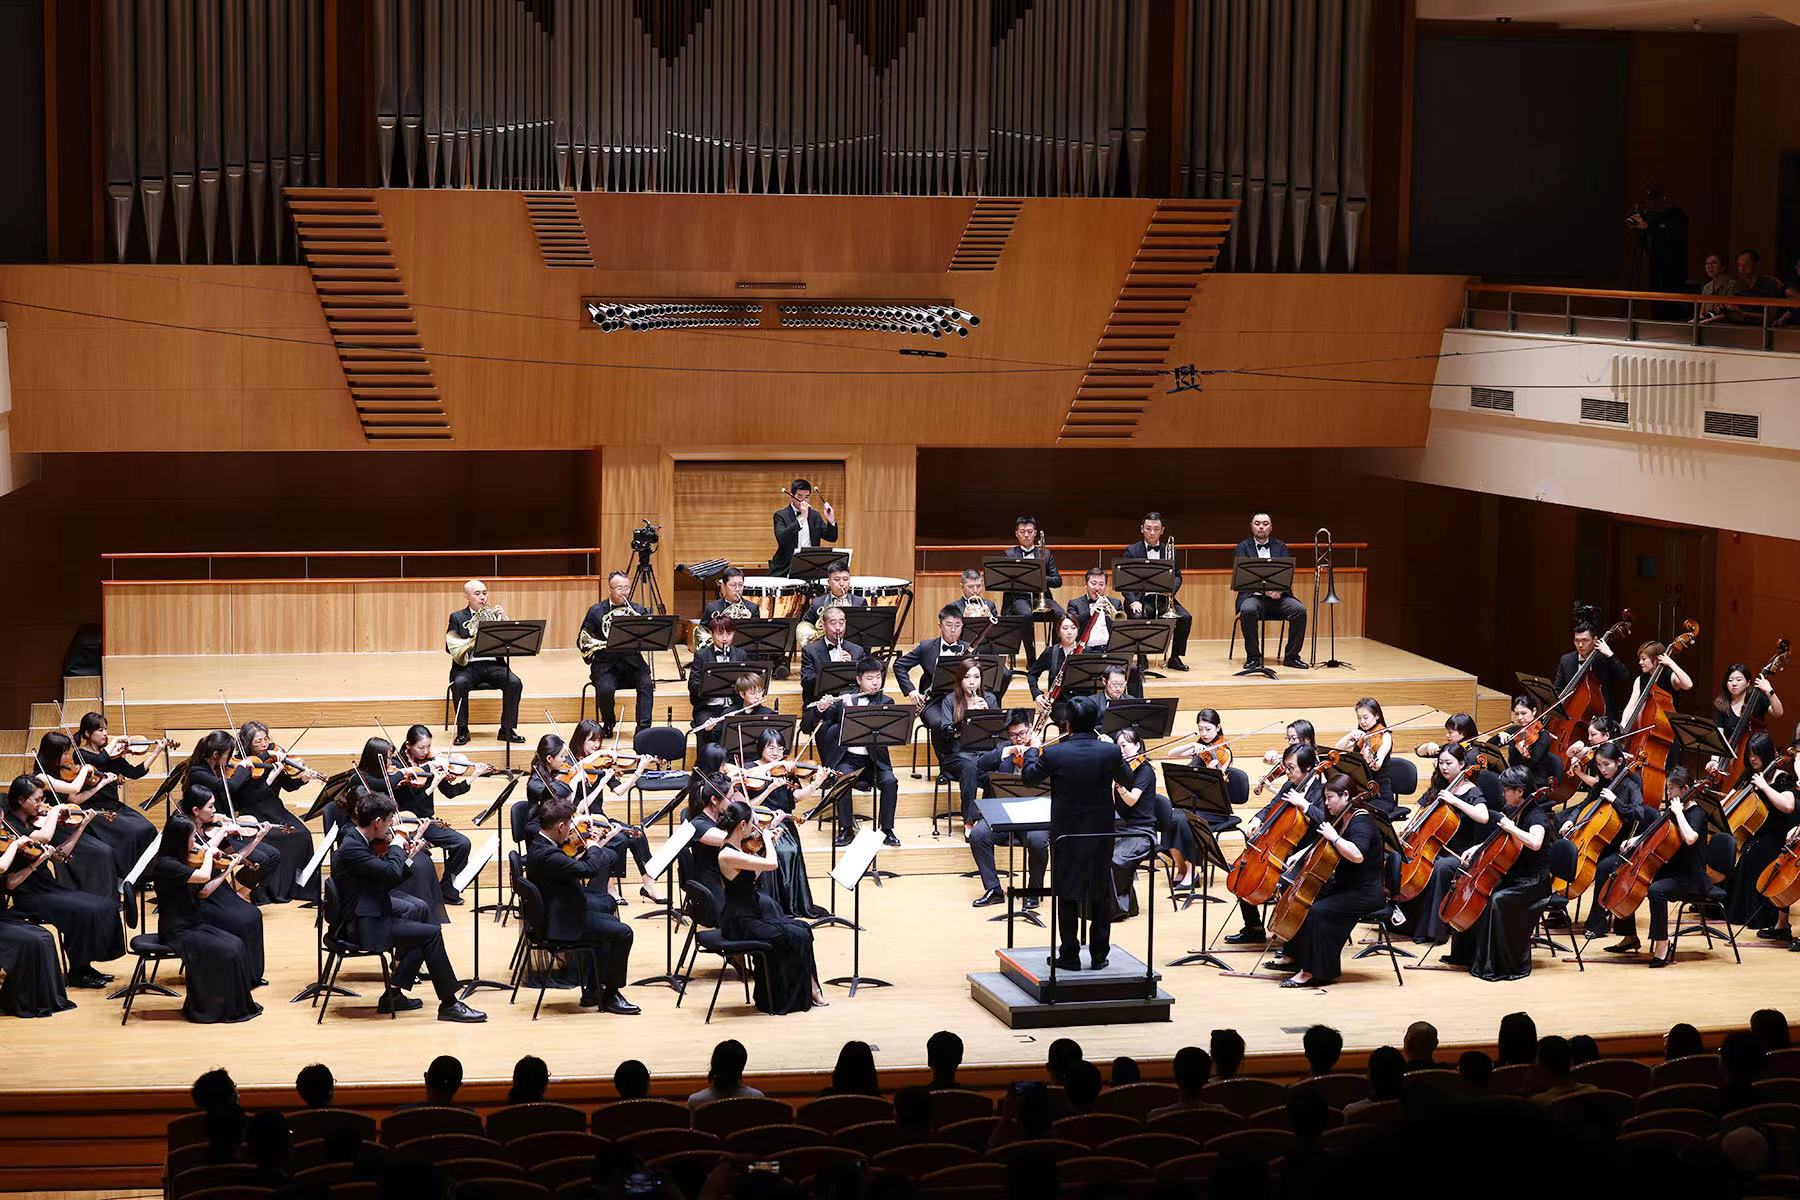 Love Concert: Pioneering Accessible Classical Music in China